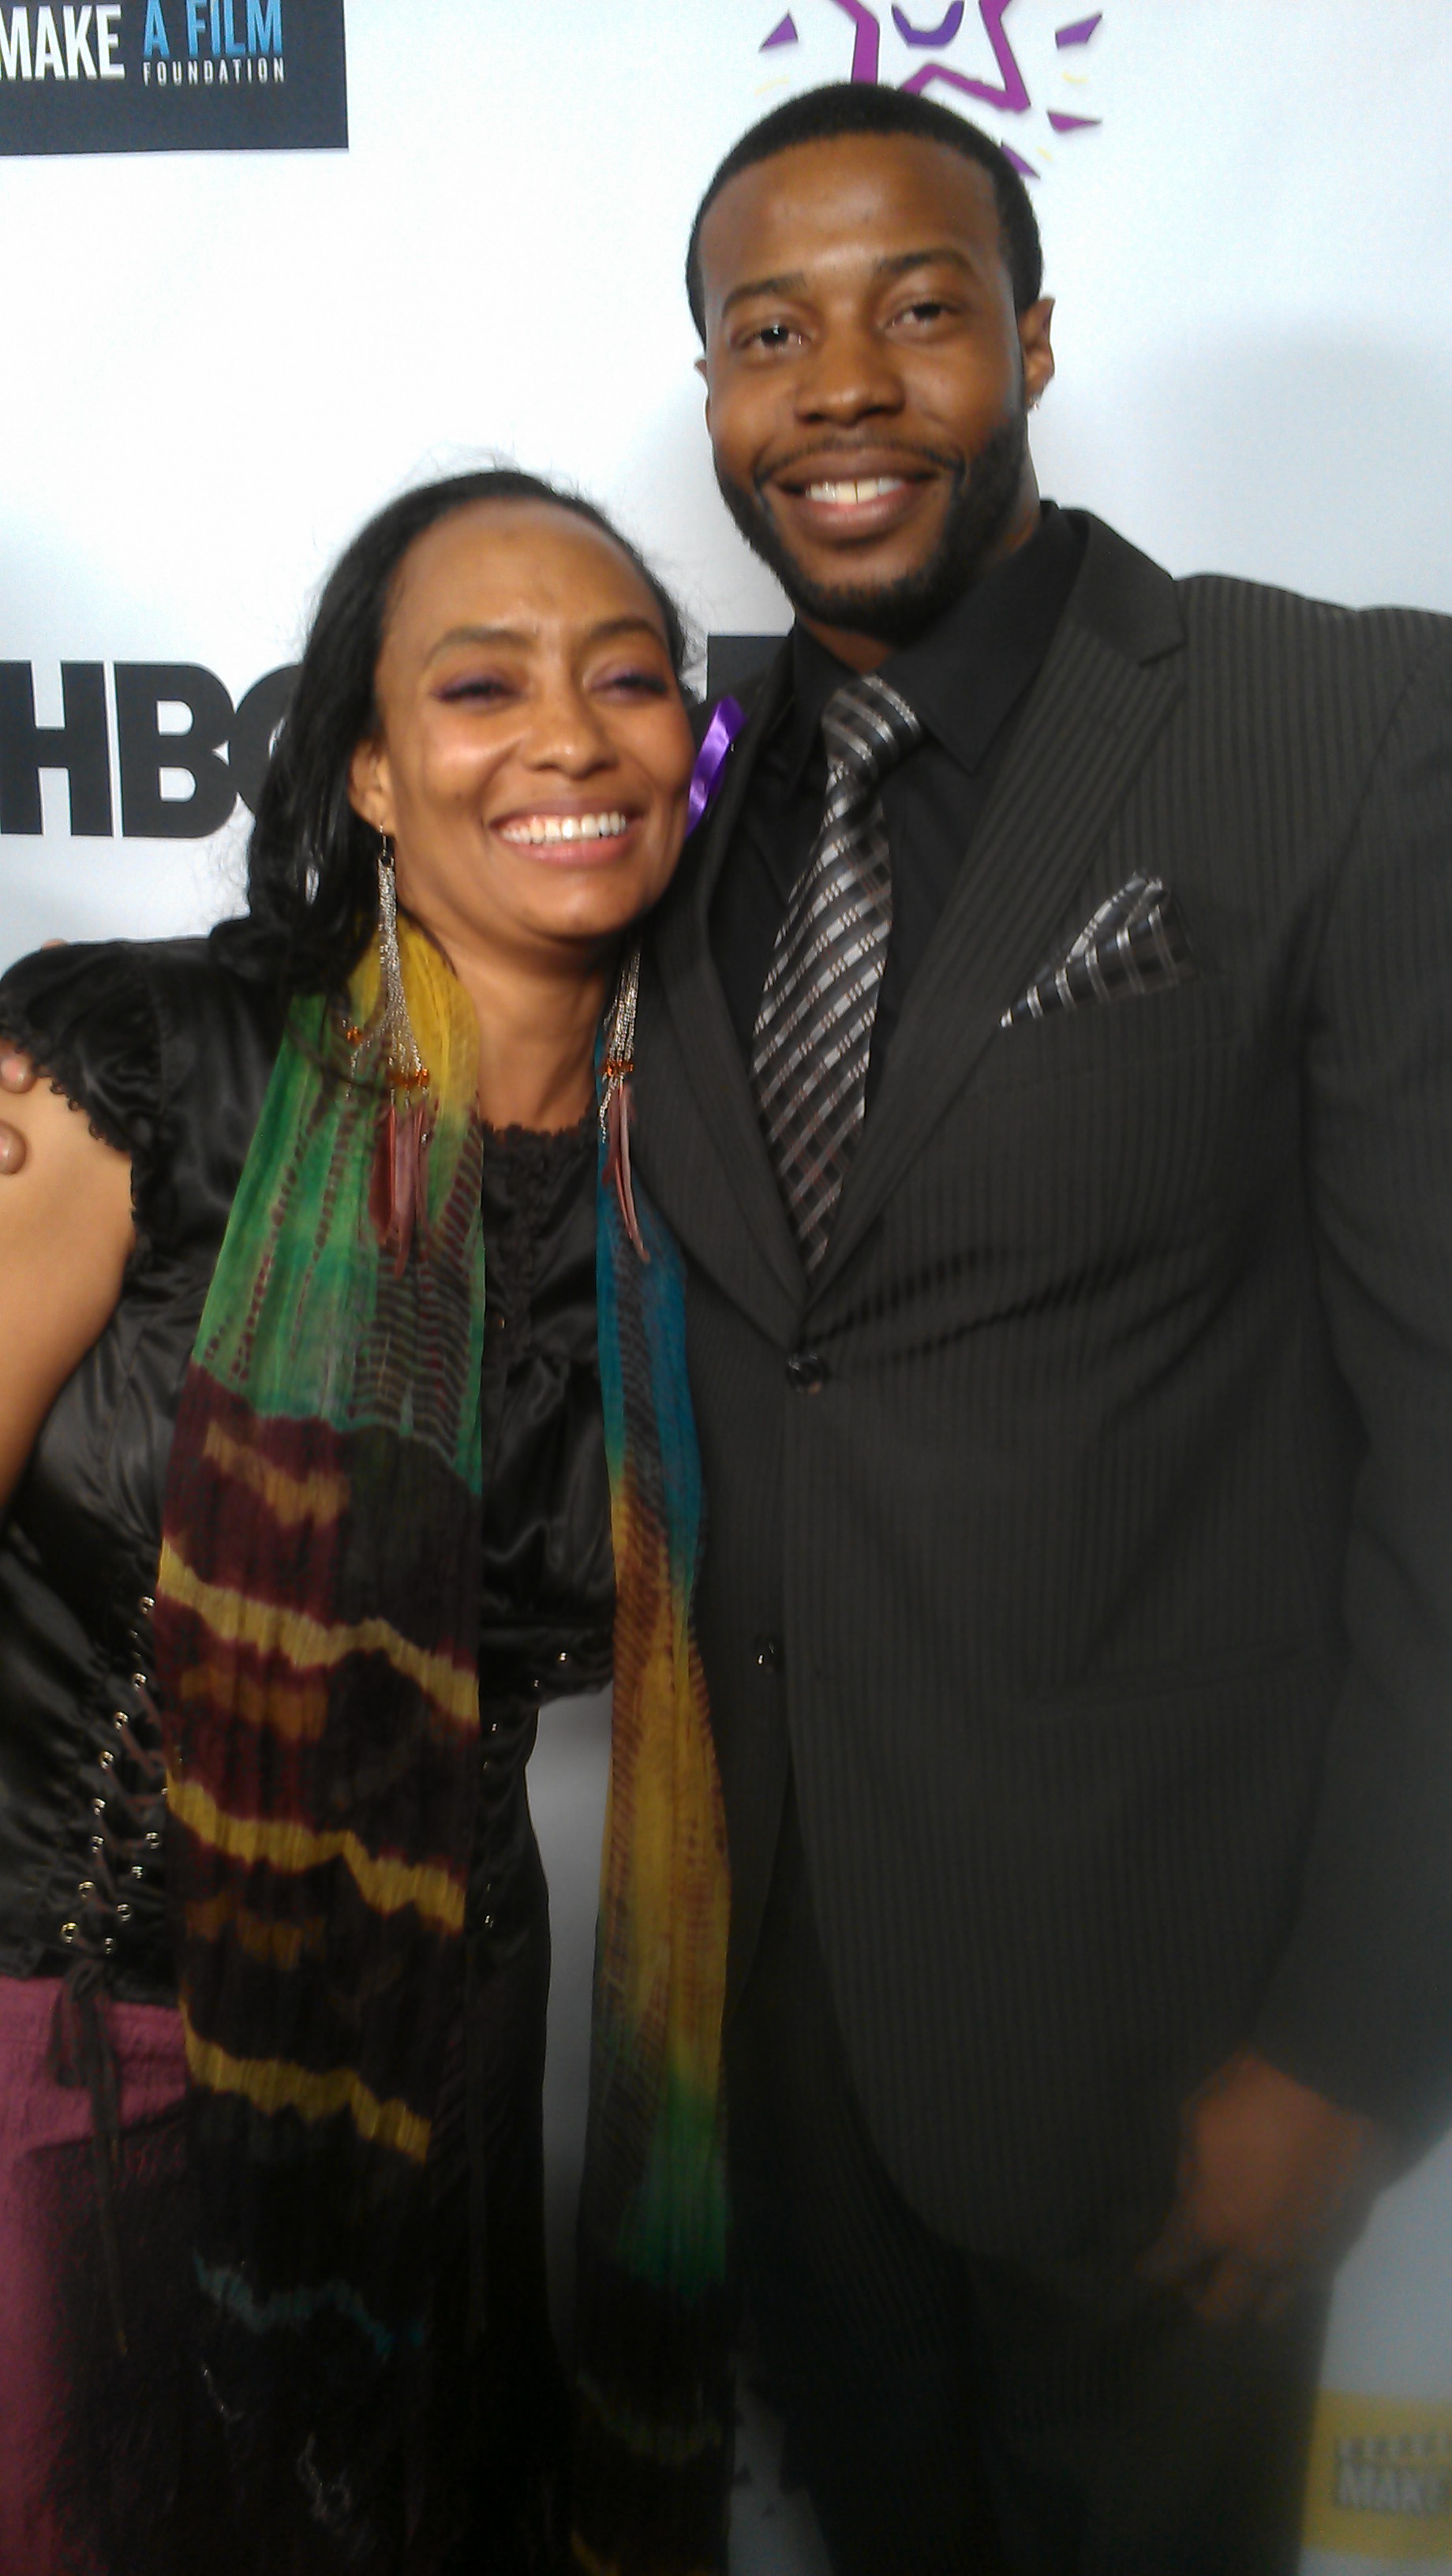 Red Carpet for The Magic Bracelet Make A Film Foundation With Founder Tamika Lamison